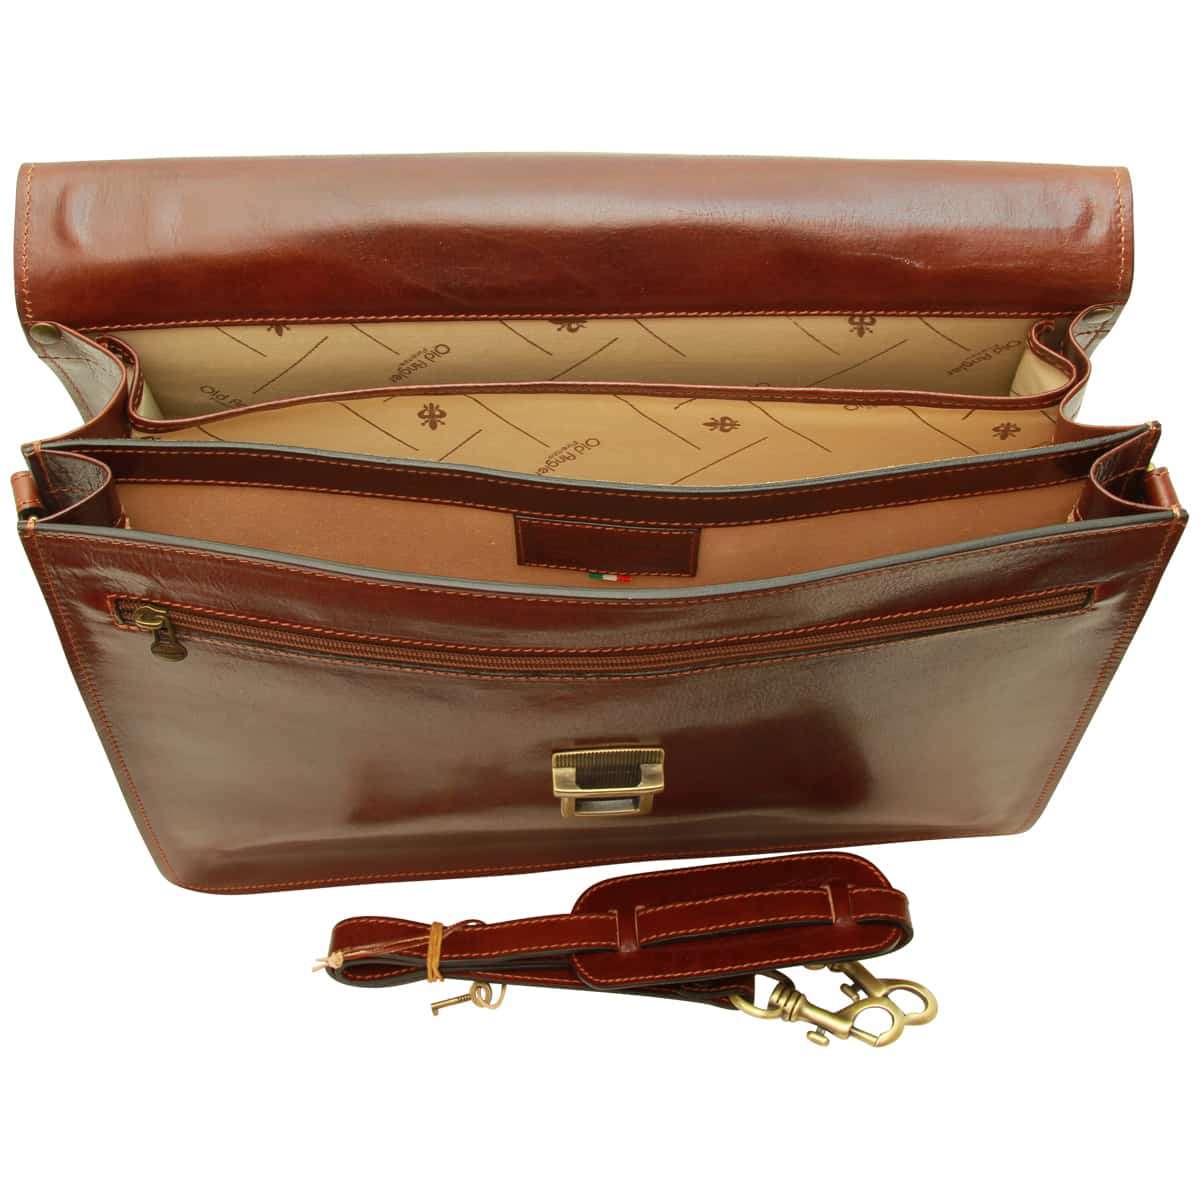 Leather Laptop Briefcase - Brown | 052805MA UK | Old Angler Firenze